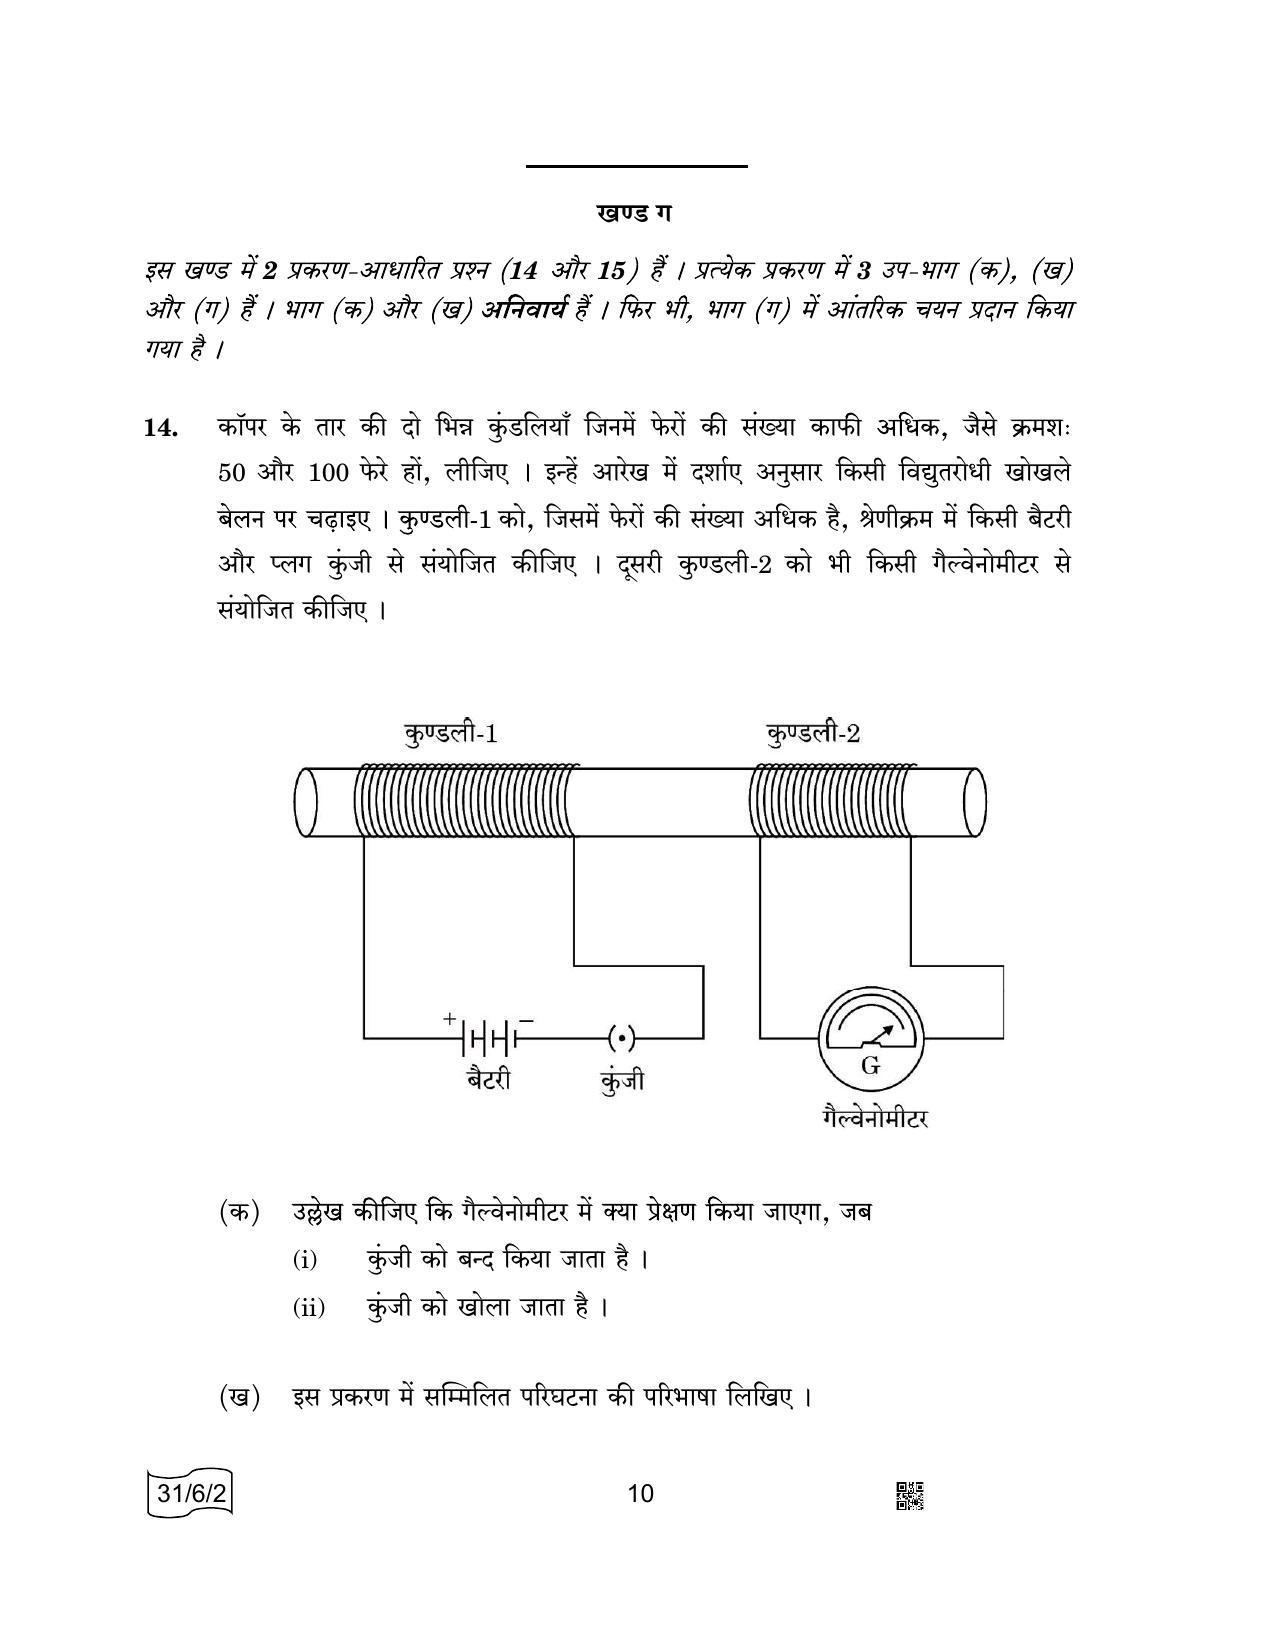 CBSE Class 10 31-6-2 SCIENCE 2022 Compartment Question Paper - Page 10